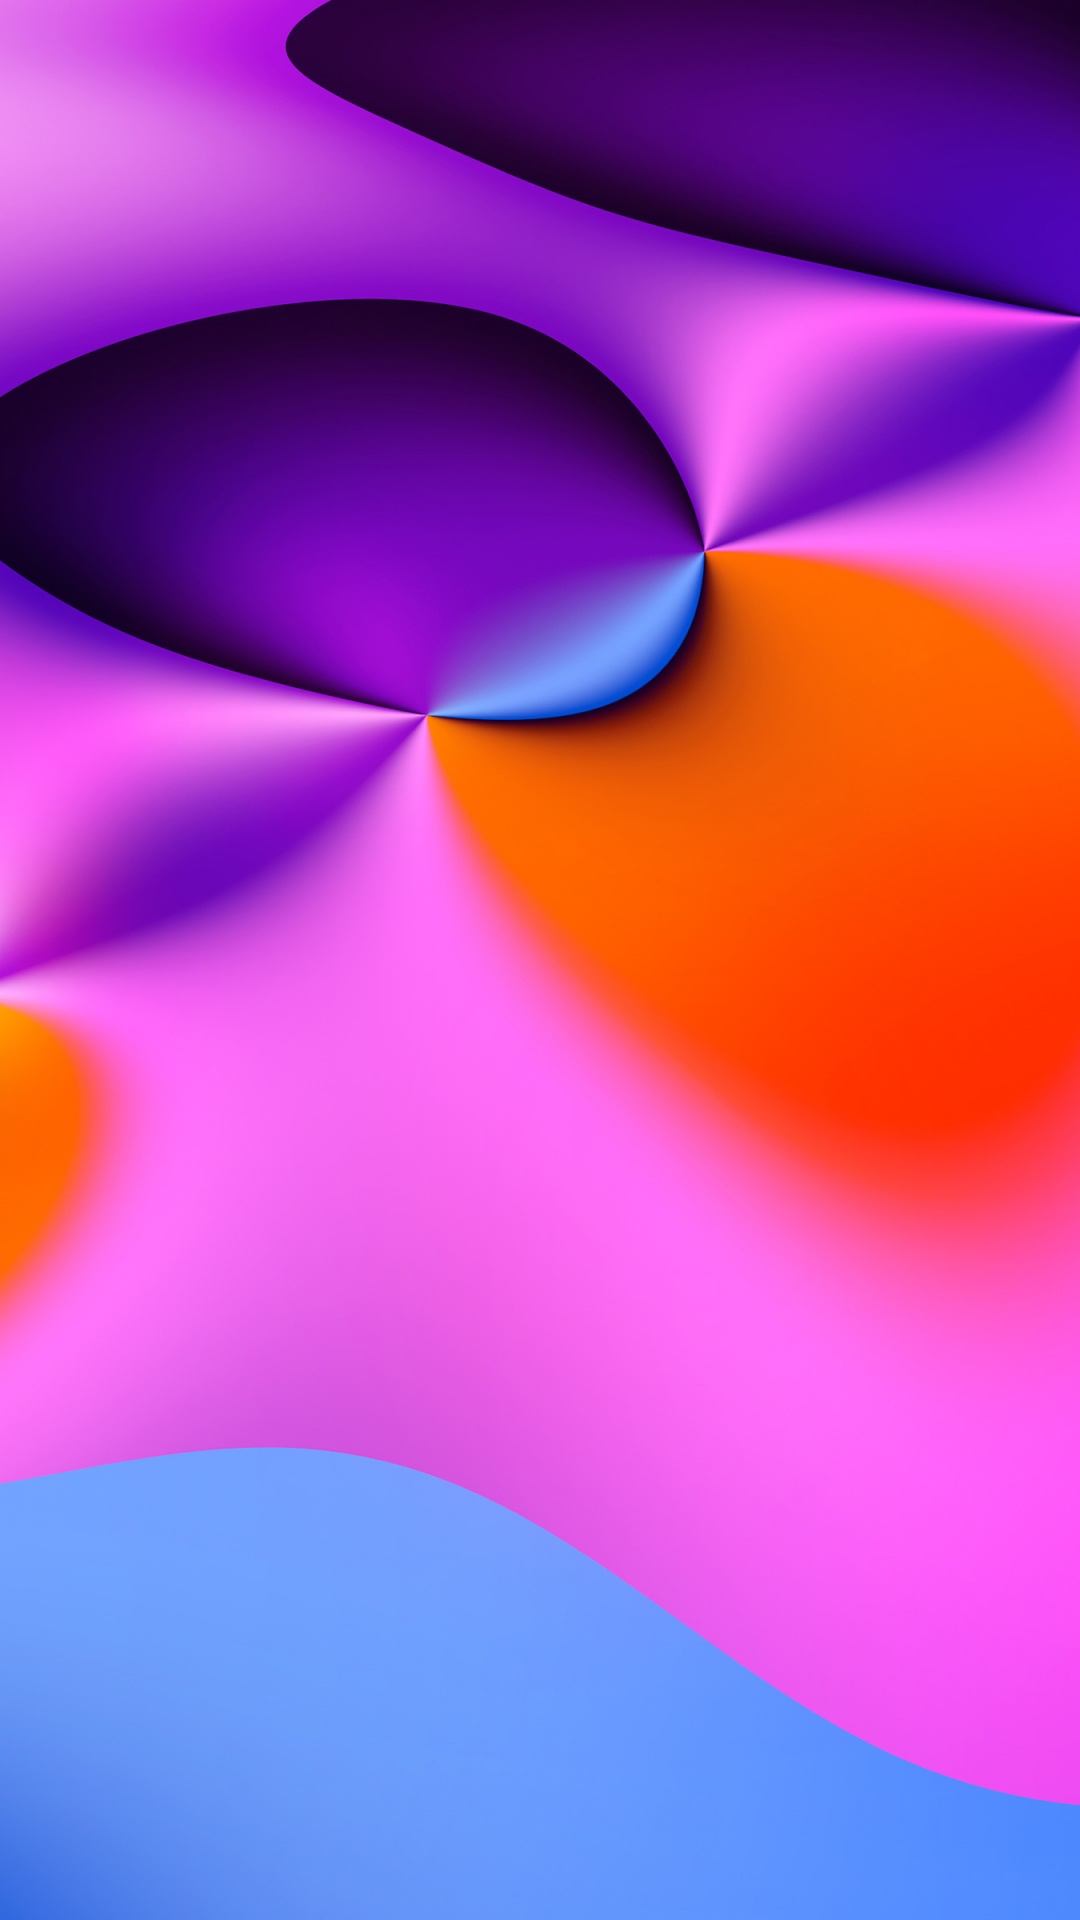 Purple Orange and Yellow Abstract Painting. Wallpaper in 1080x1920 Resolution